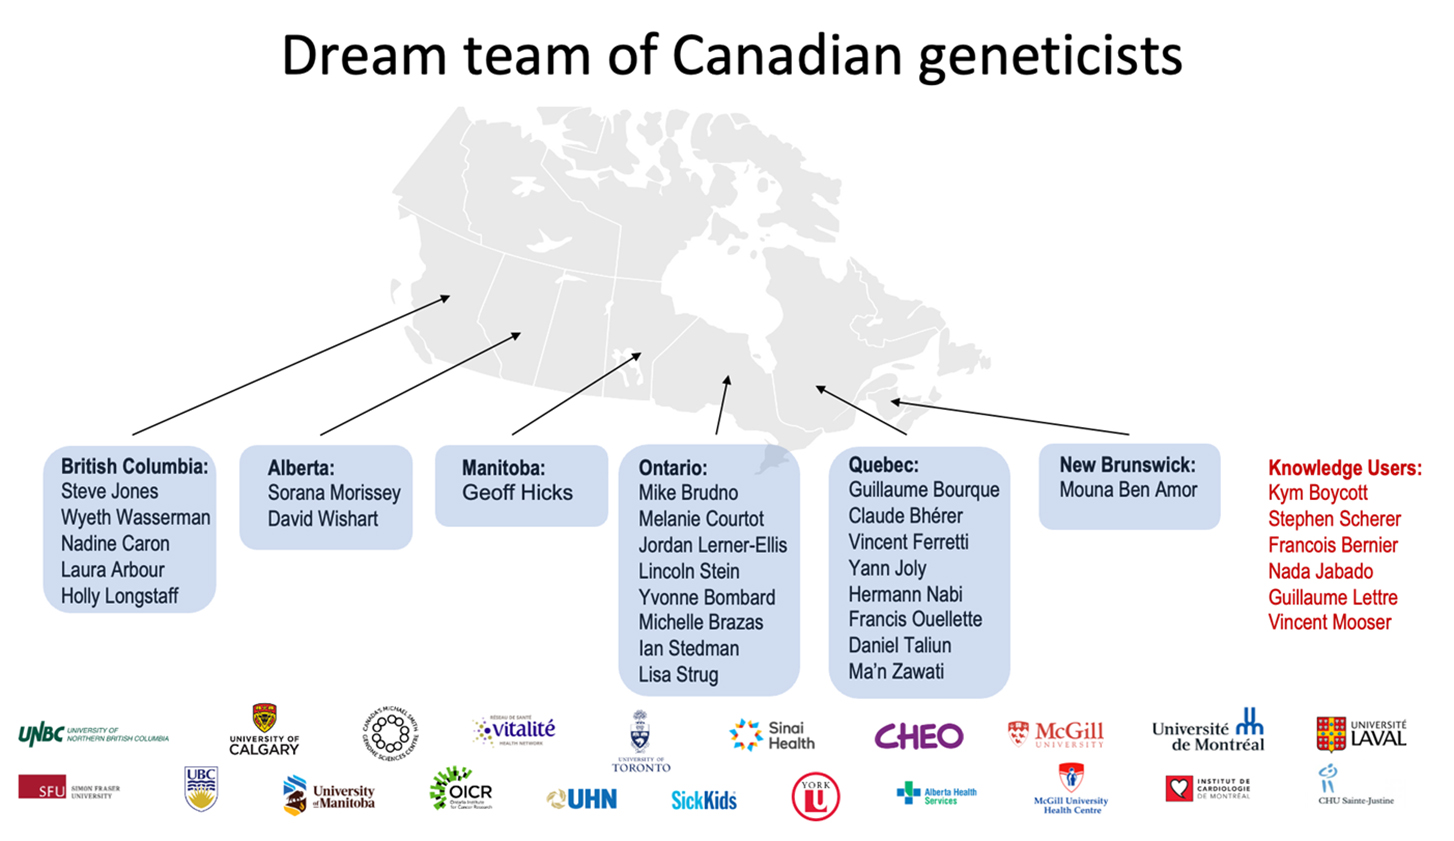 The map visually represents the geographical distribution of geneticists involved in the Pan-Canadian Genome Library development across Canada. Their institution’s logos are included in the image.